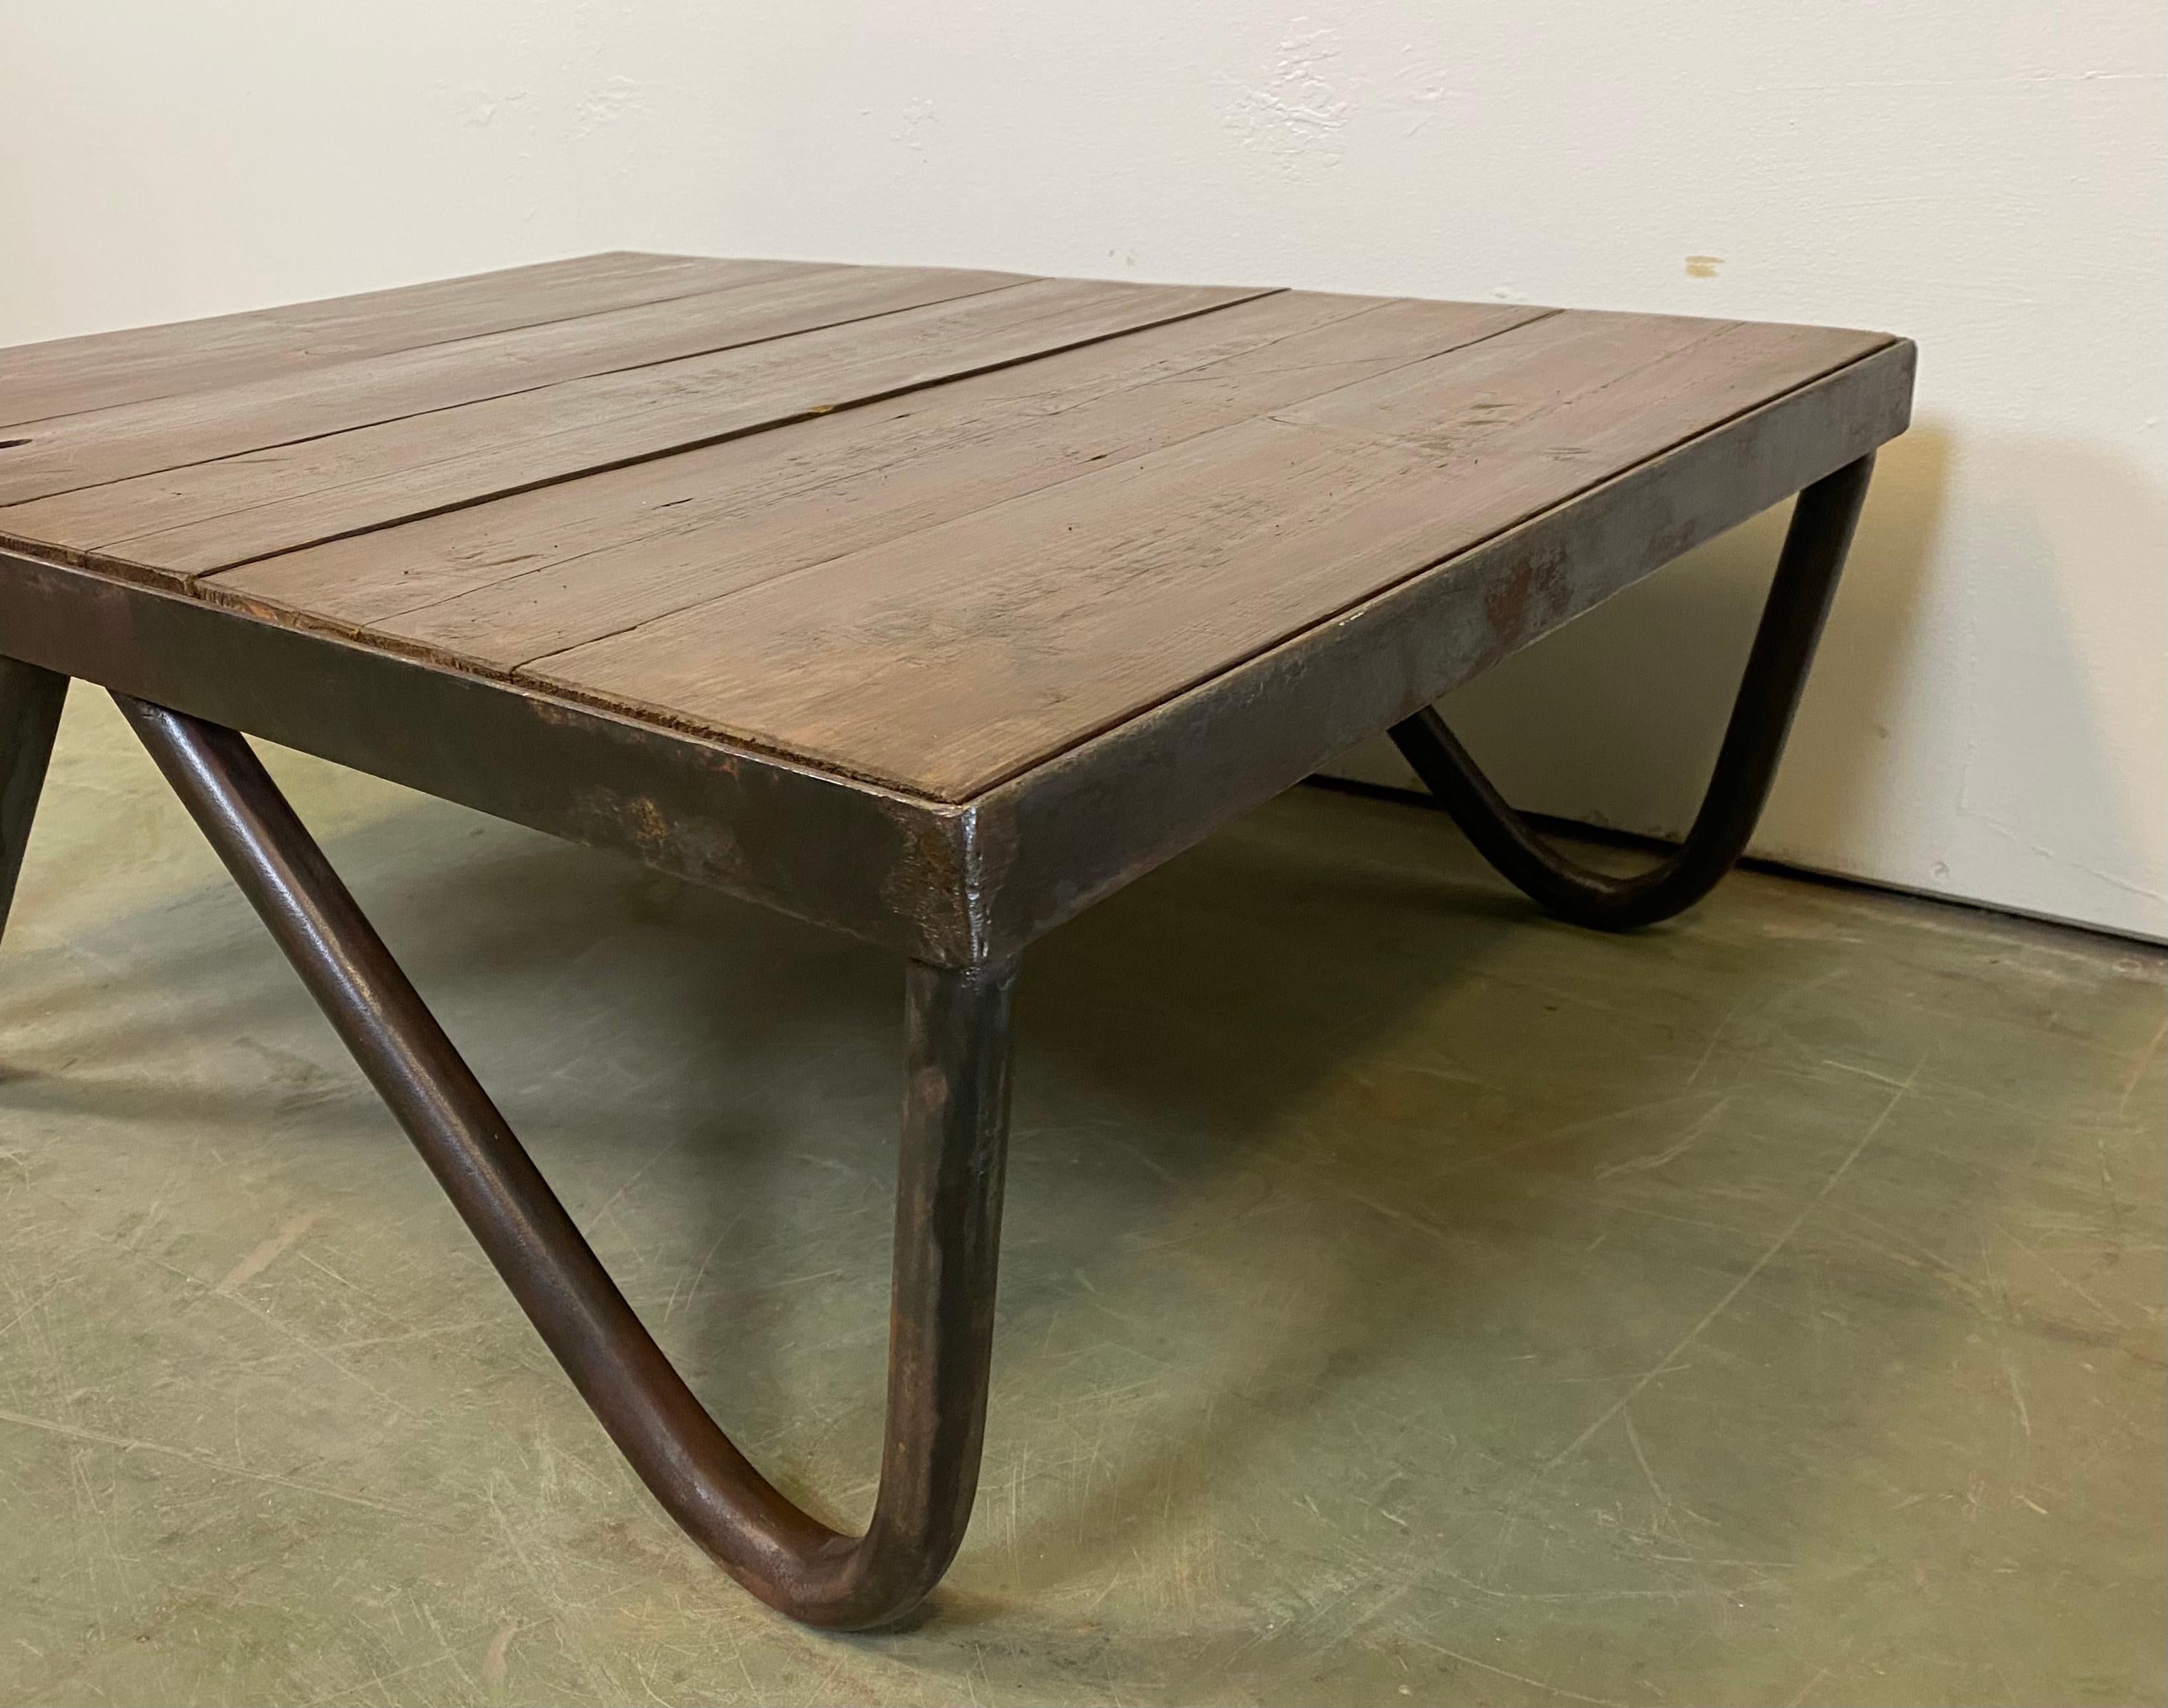 - Vintage Industrial coffee table manufactured in the 1960s 
- Made of solid wood and iron 
- Weight of the table is 18 kg.